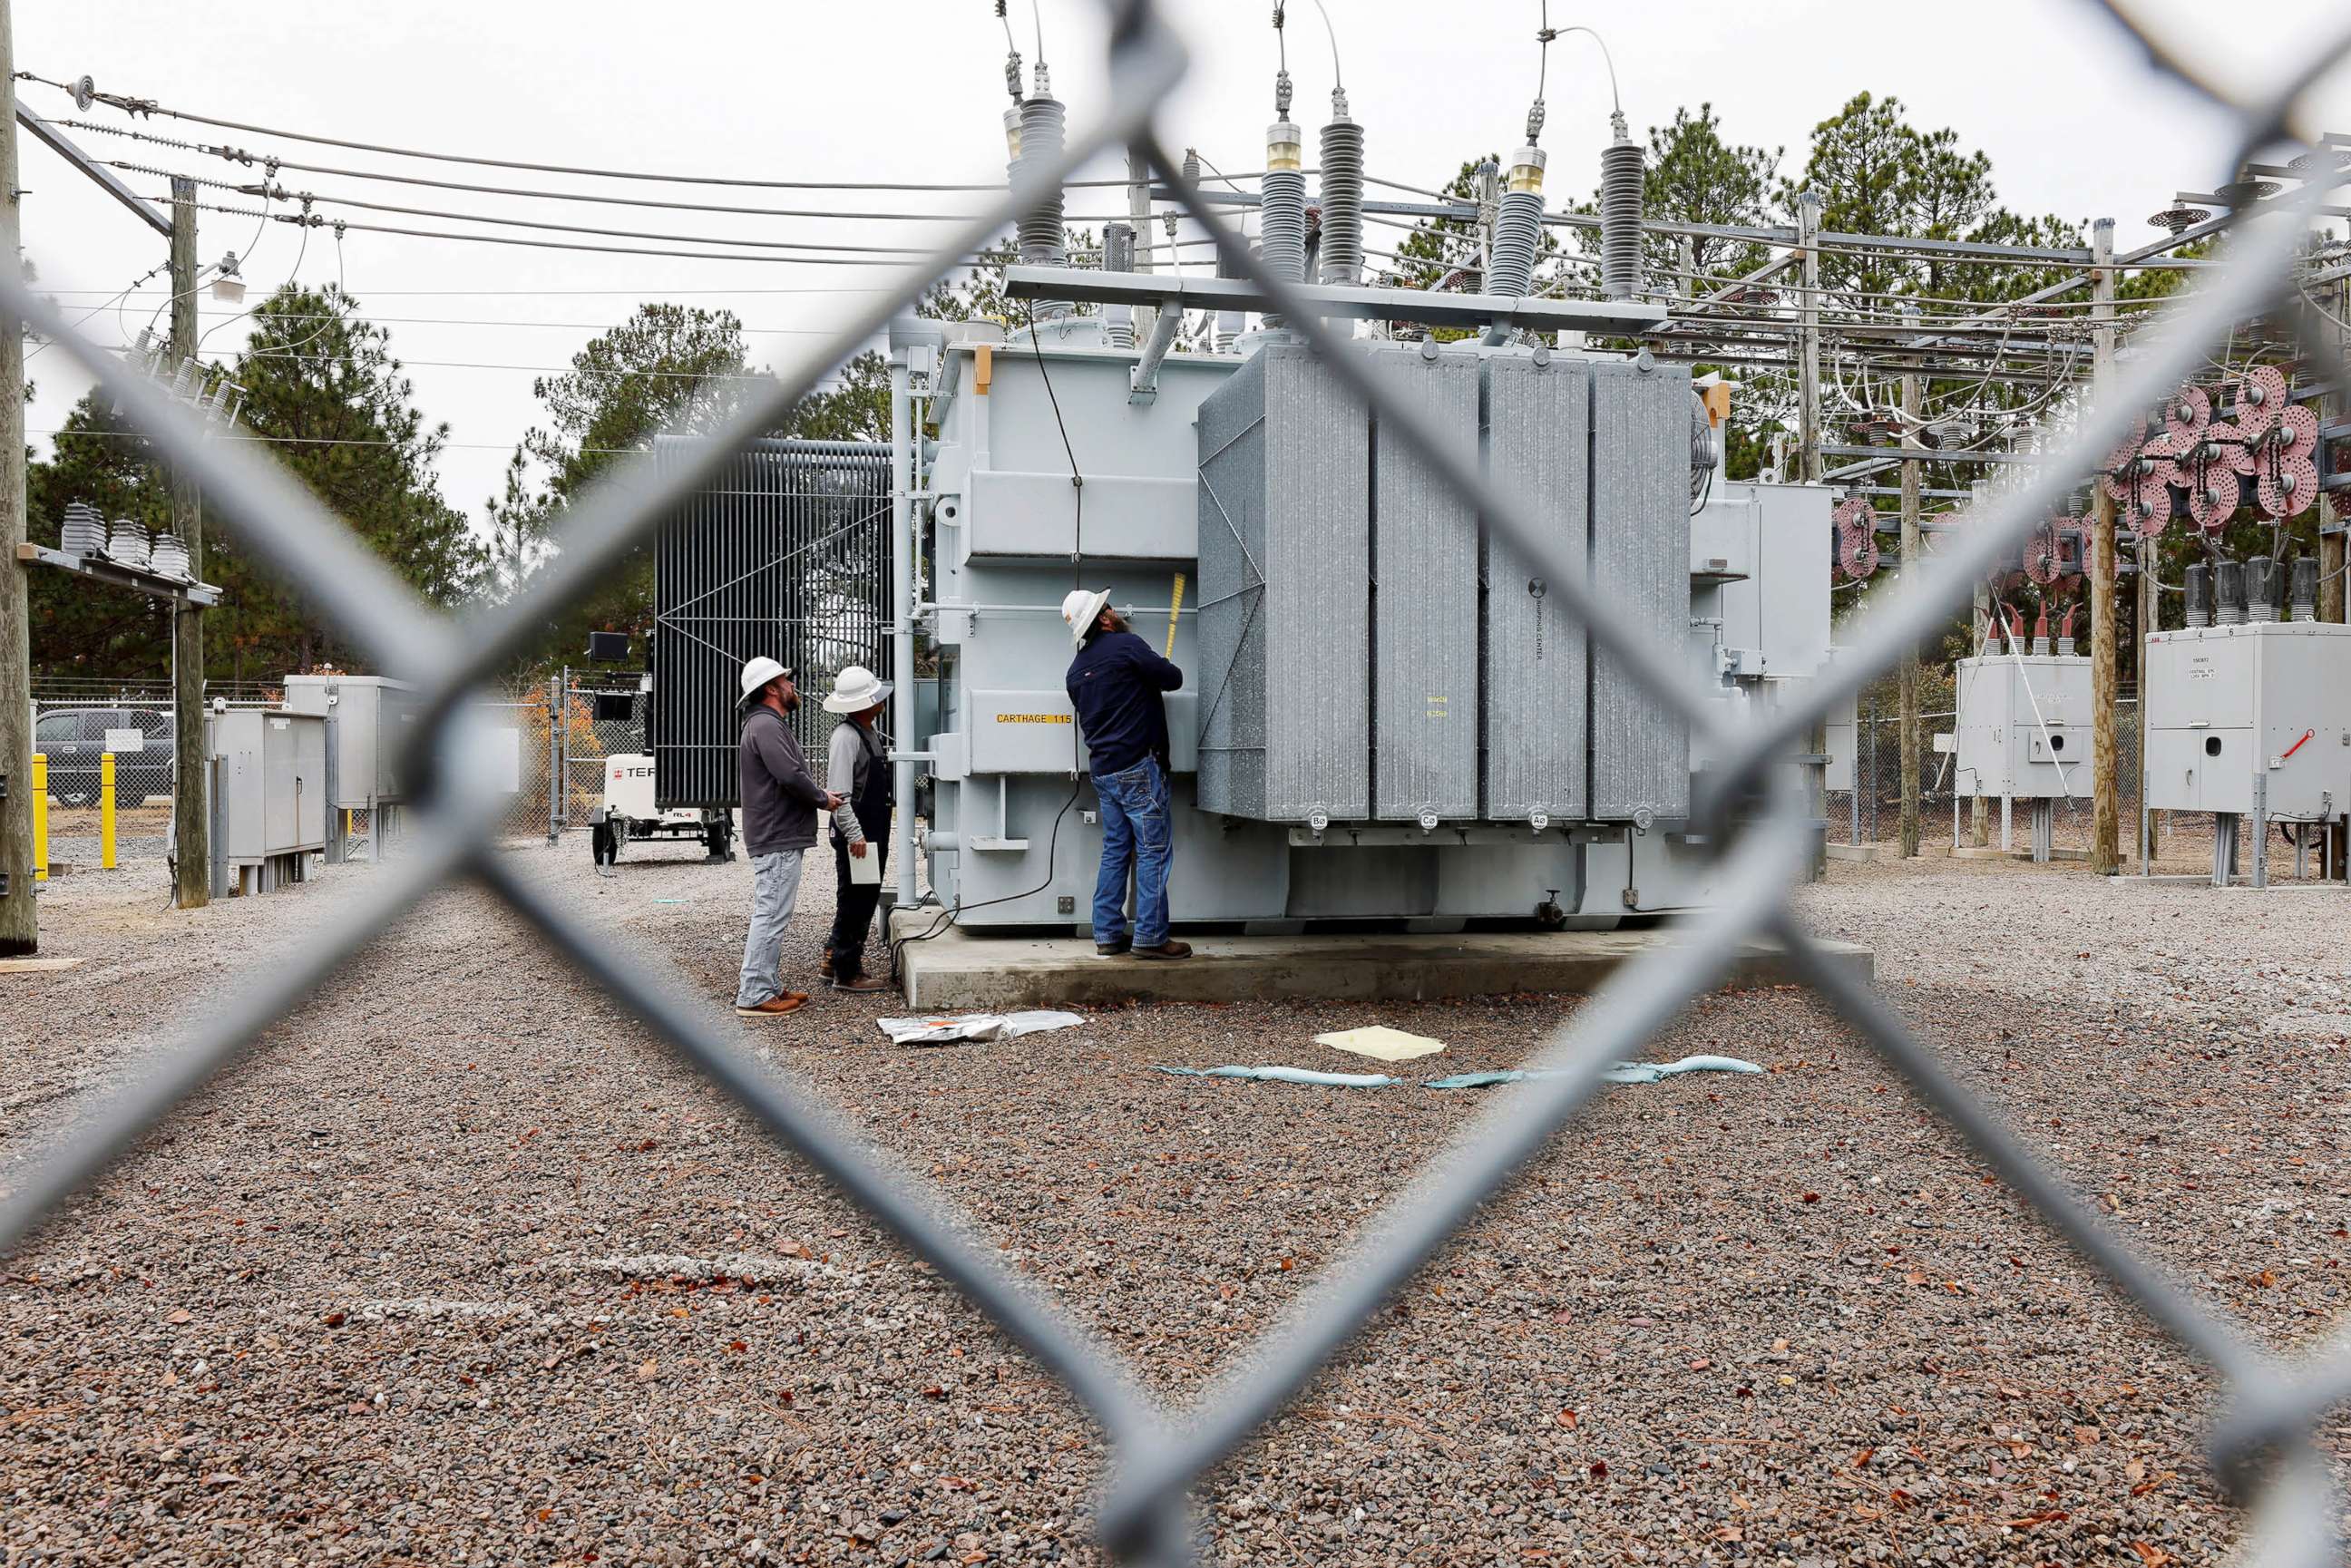 PHOTO: Duke Energy workers inspect a transformer radiator that they said was damaged by gunfire that crippled an electrical substation after the Moore County Sheriff said that vandalism caused a mass power outage, in Carthage, North Carolina, Dec. 4, 2022